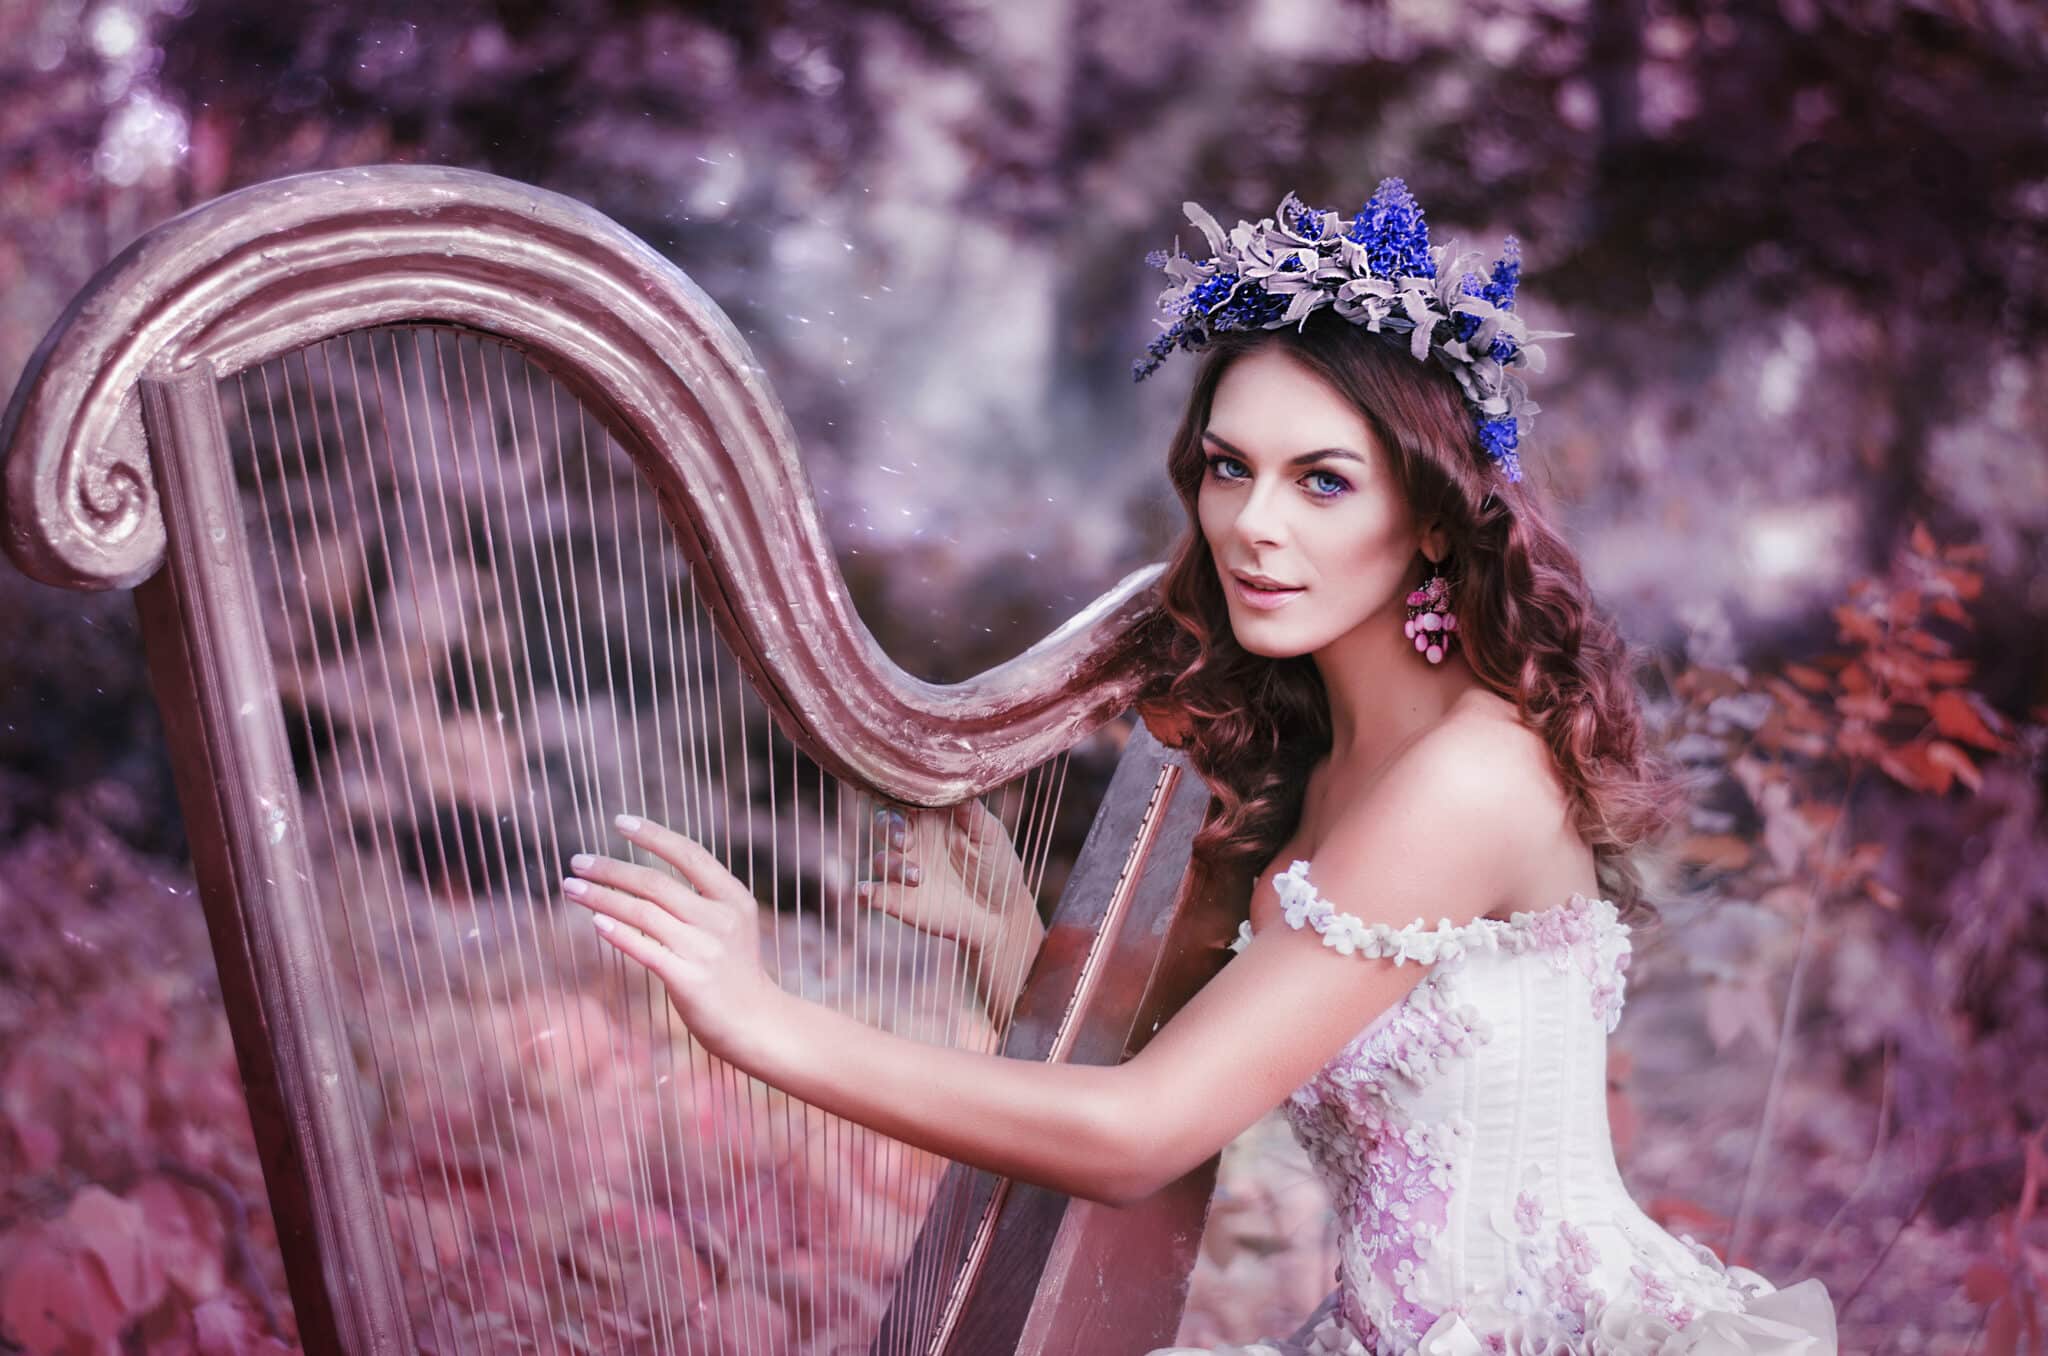 beautiful mystical woman with a flower wreath on her head playing the harp in the woods